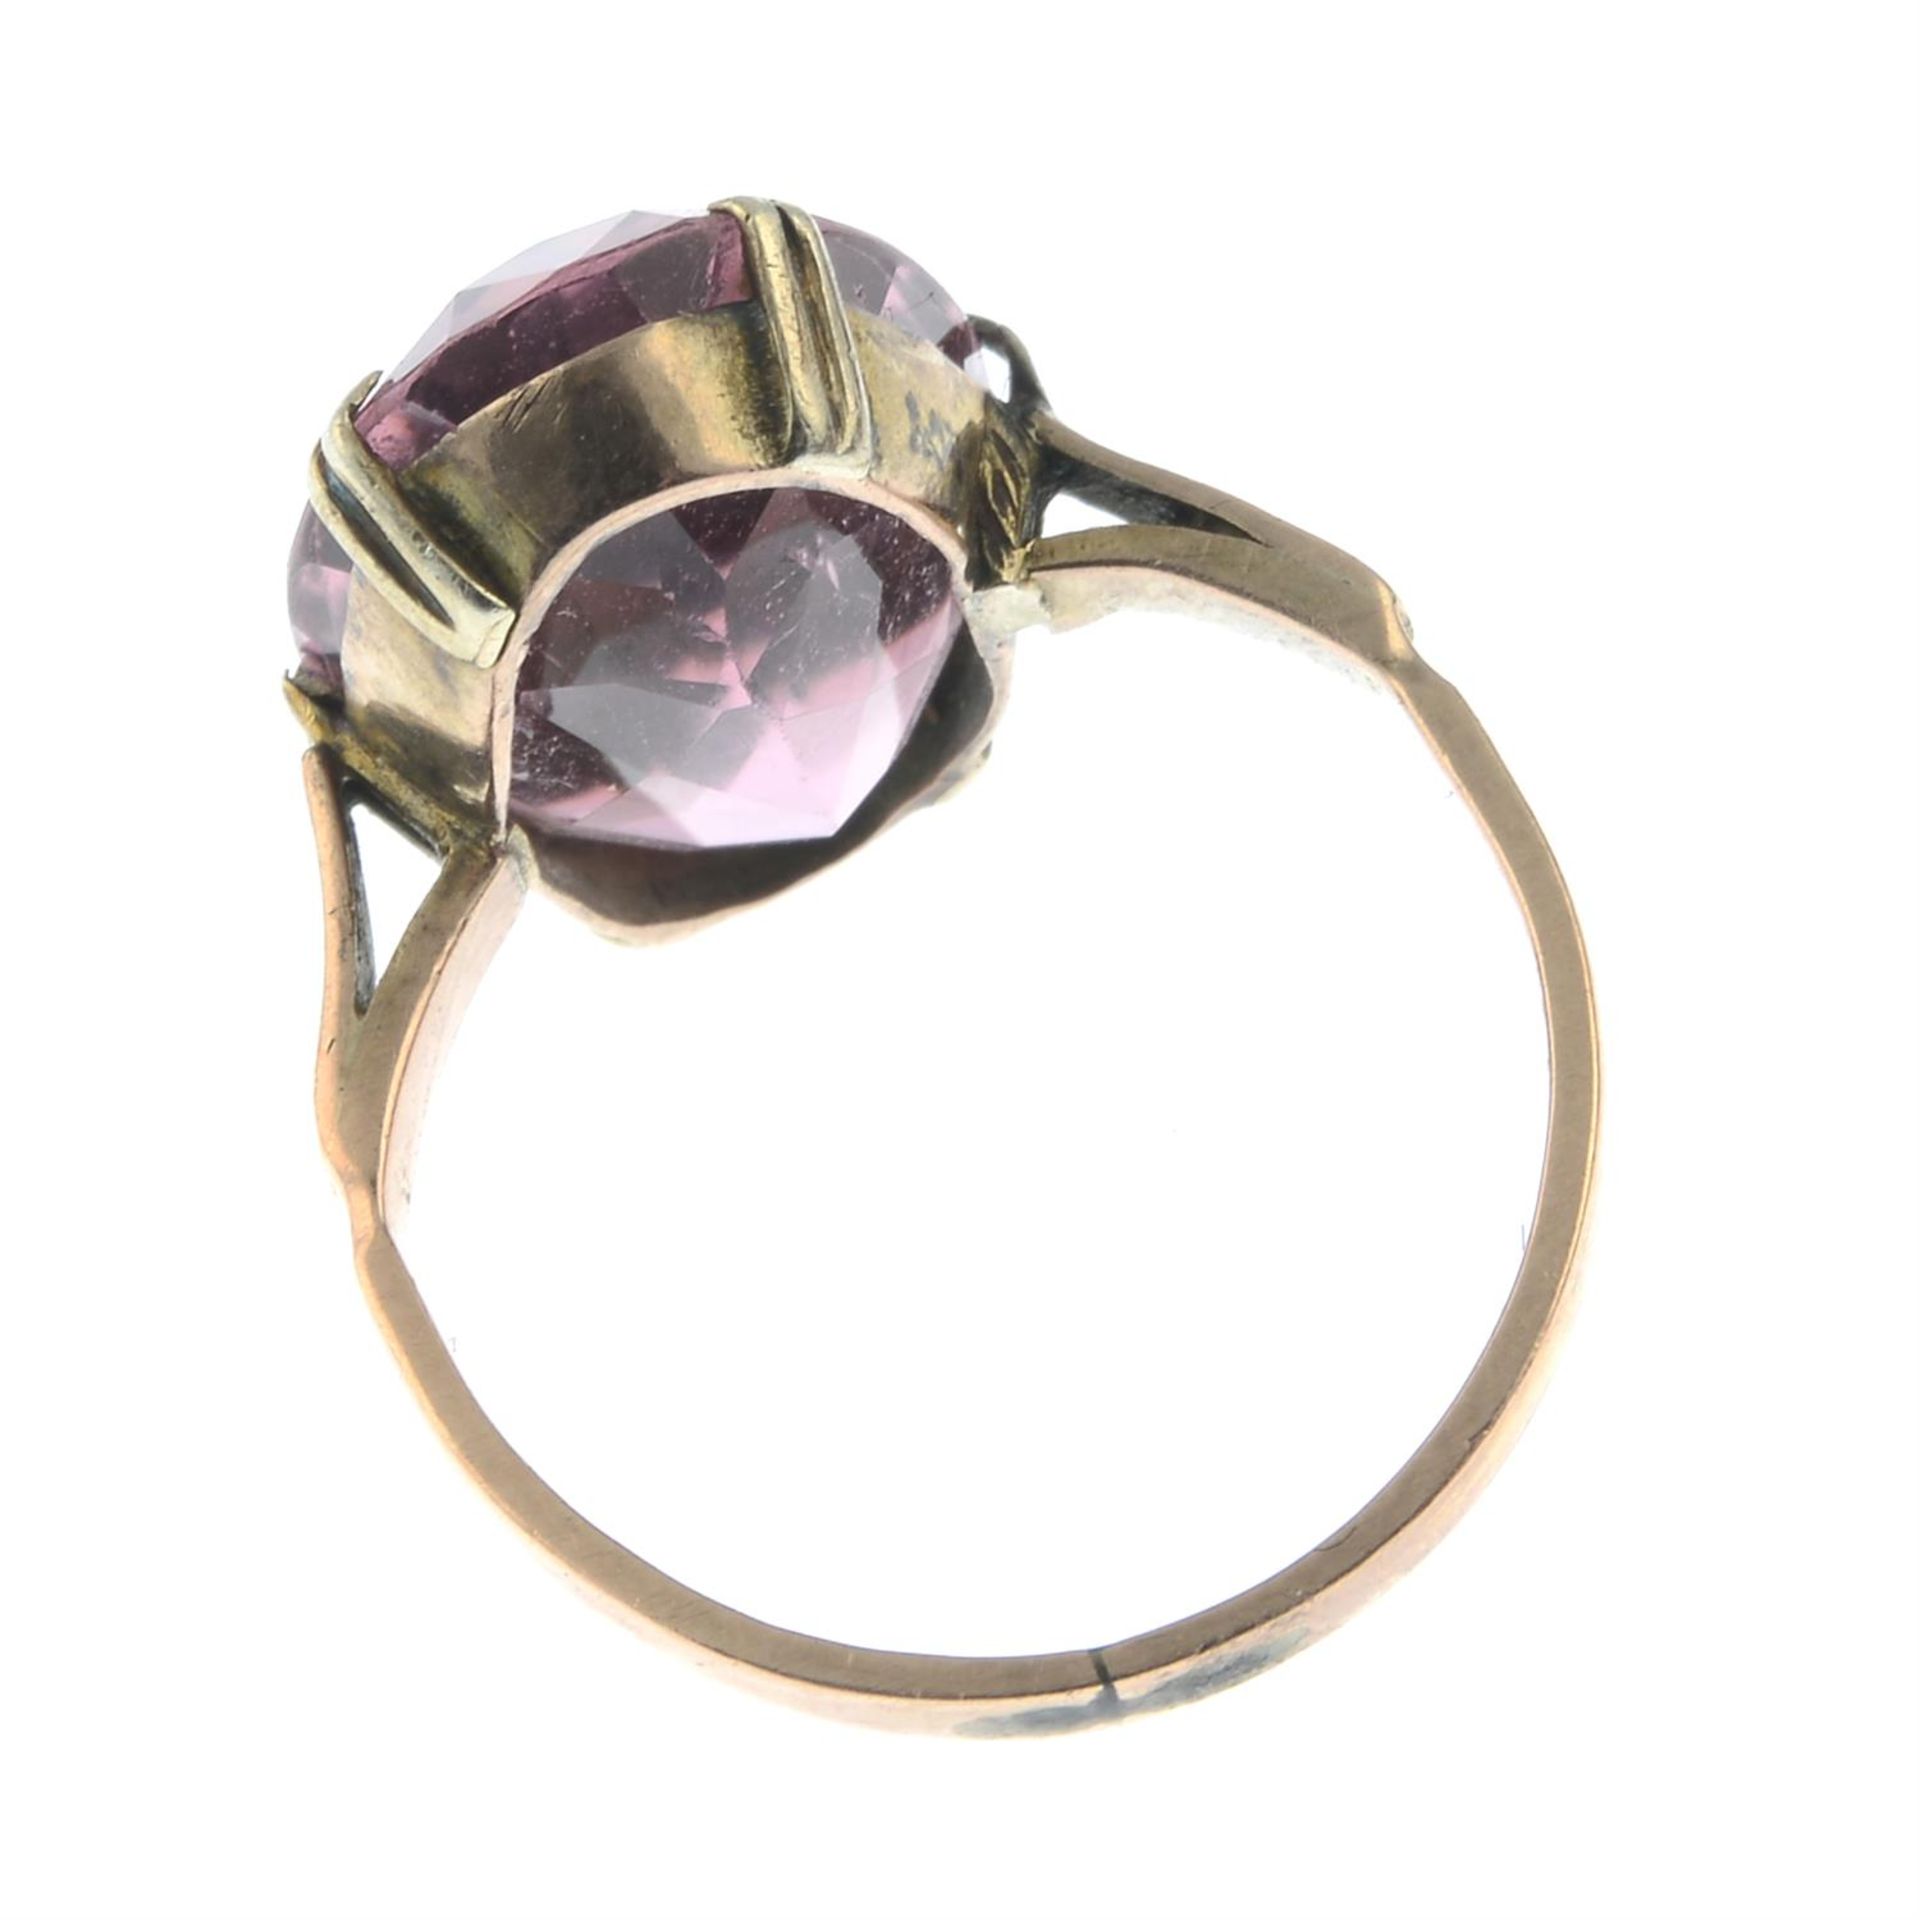 An early 20th century 9ct gold pink tourmaline single-stone ring. - Image 2 of 2